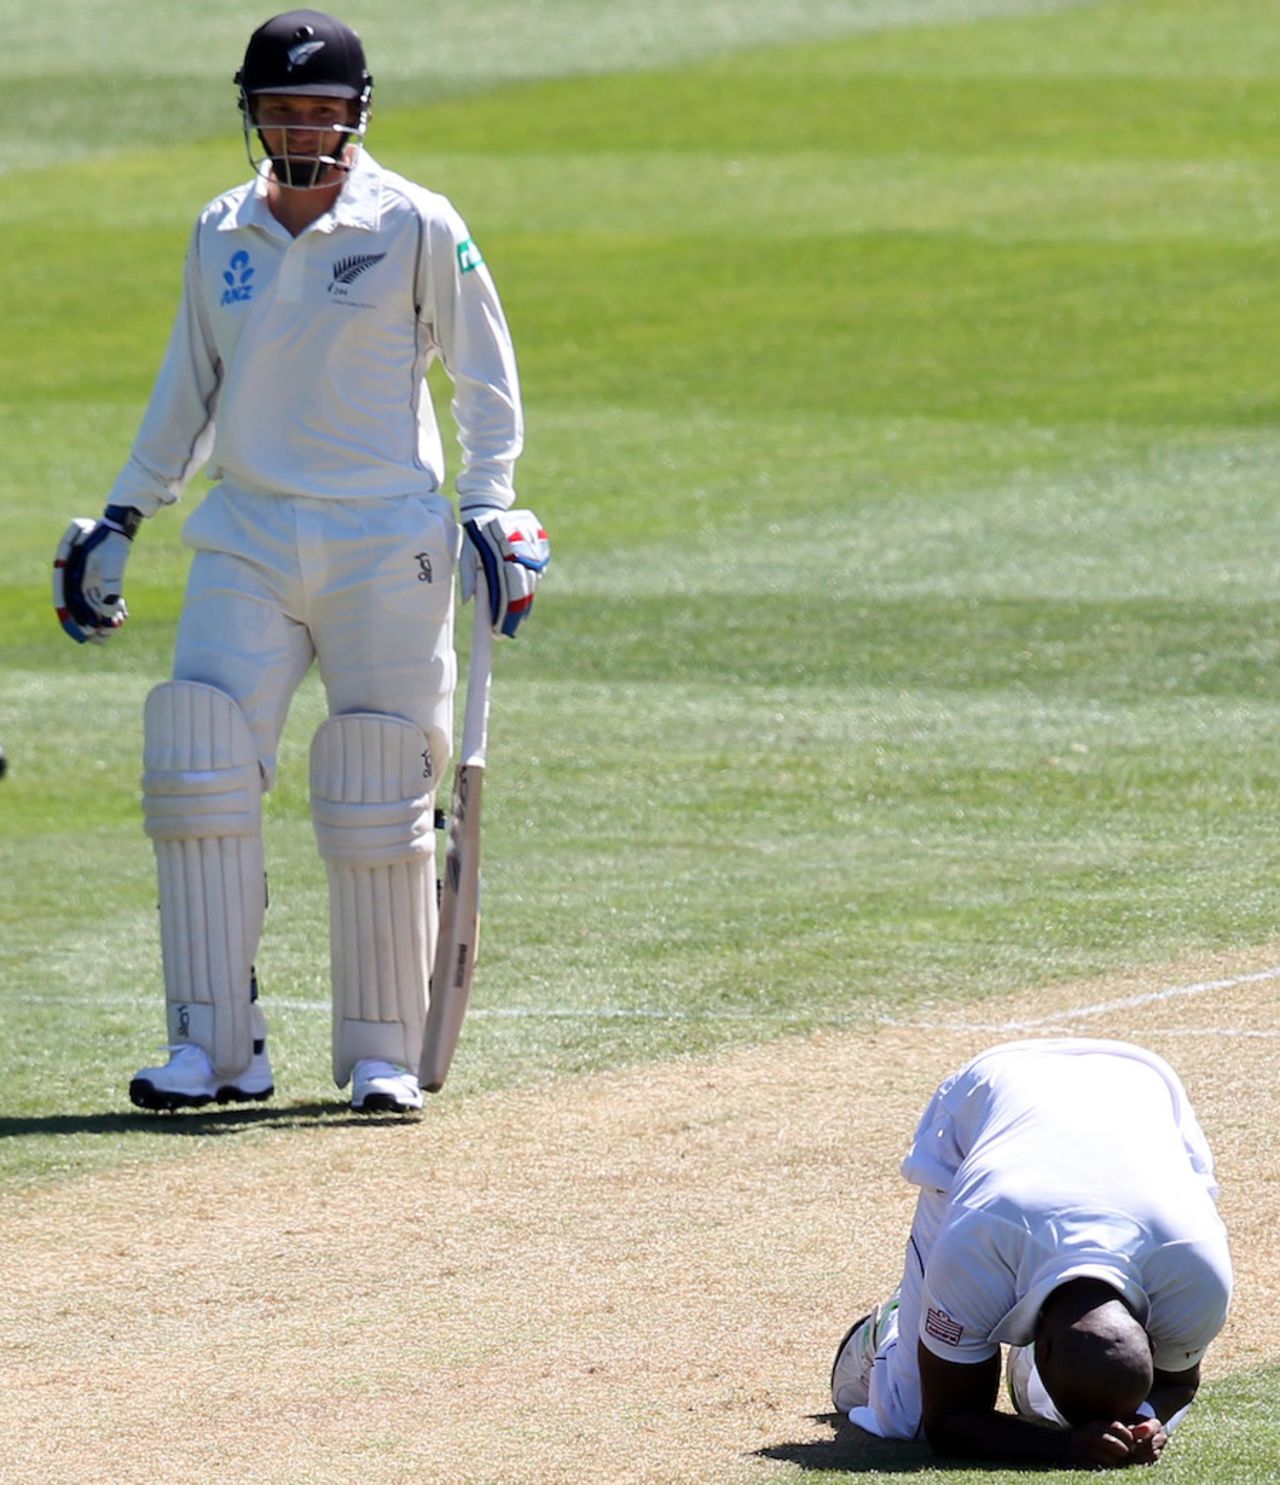 Tino Best reacts after an edge fell short at slips, New Zealand v West Indies, 1st Test, Dunedin, 2nd day, December 4, 2013